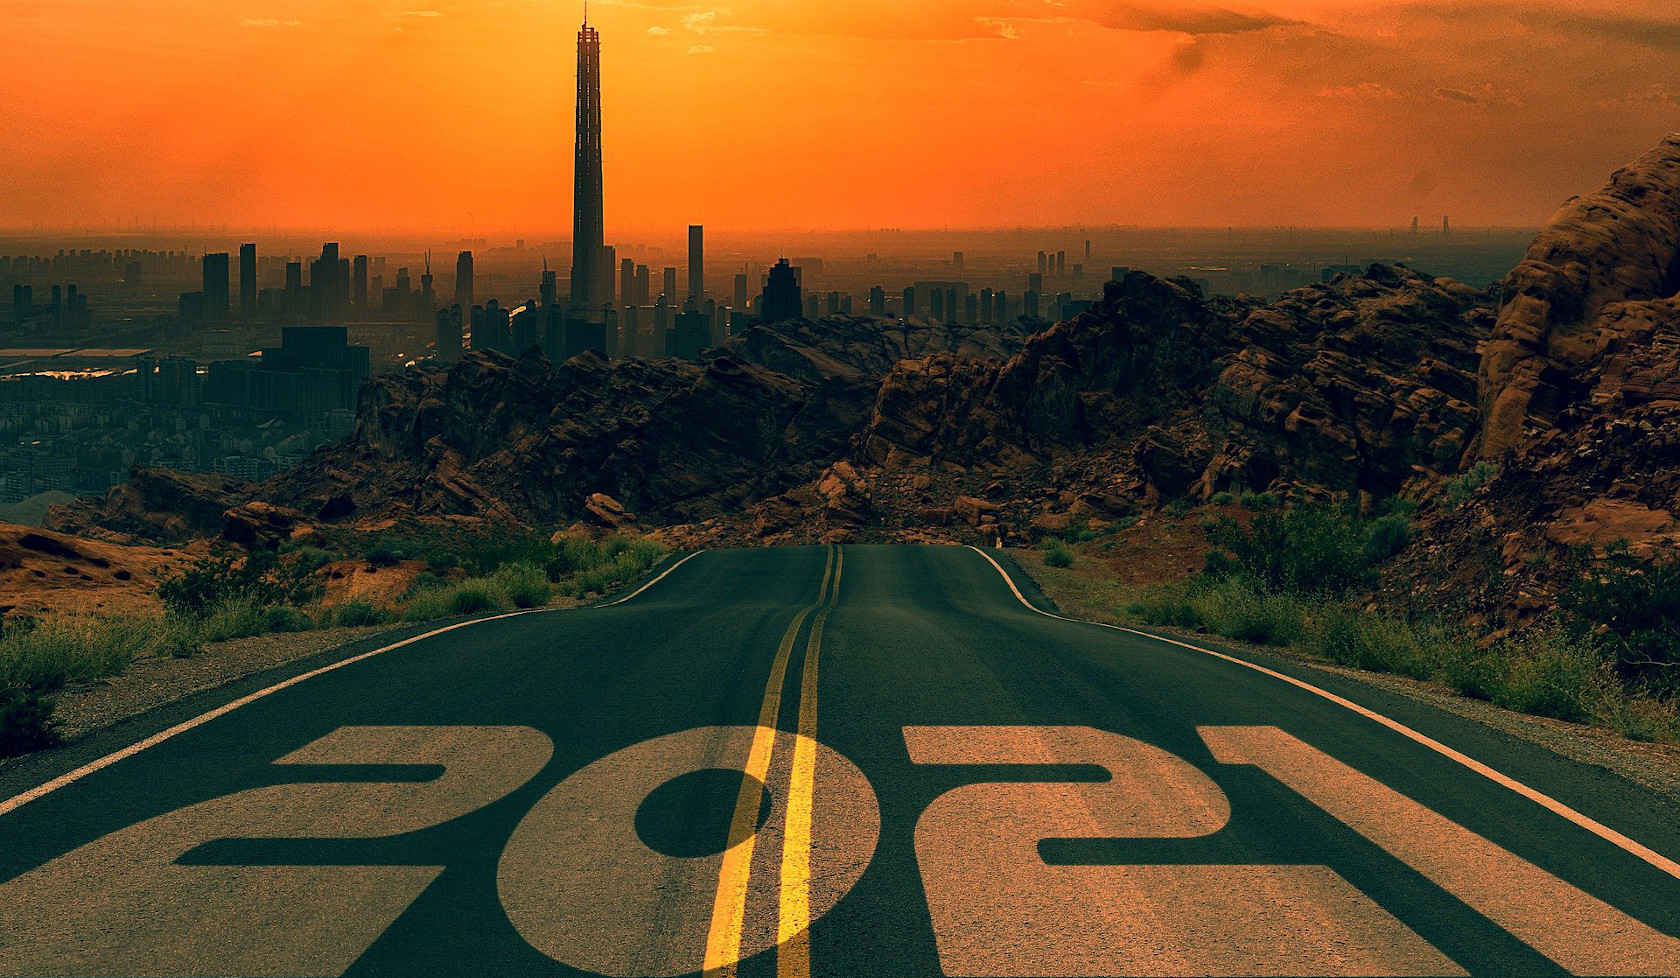 View of a city with 2021 written on the road